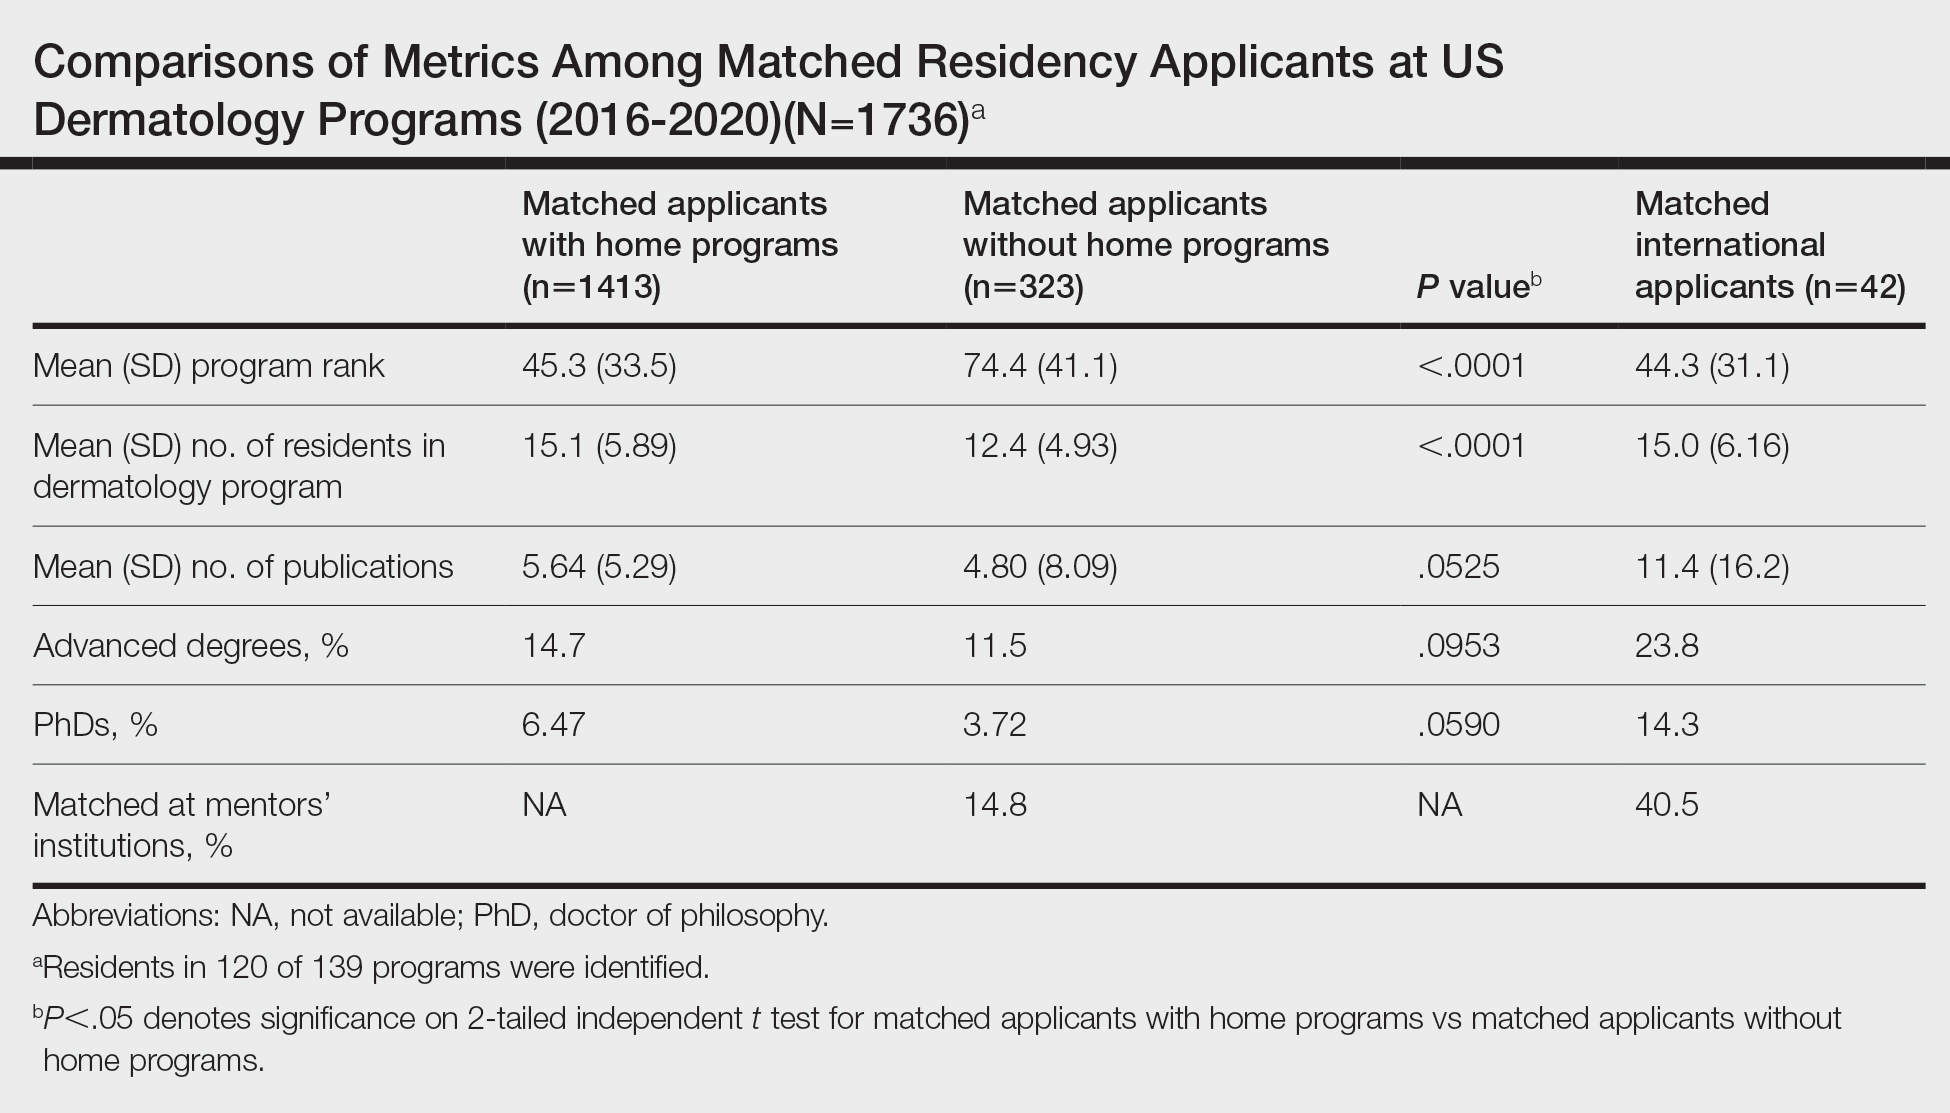 Comparisons of Metrics Among Matched Residency Applicants at US Dermatology Programs